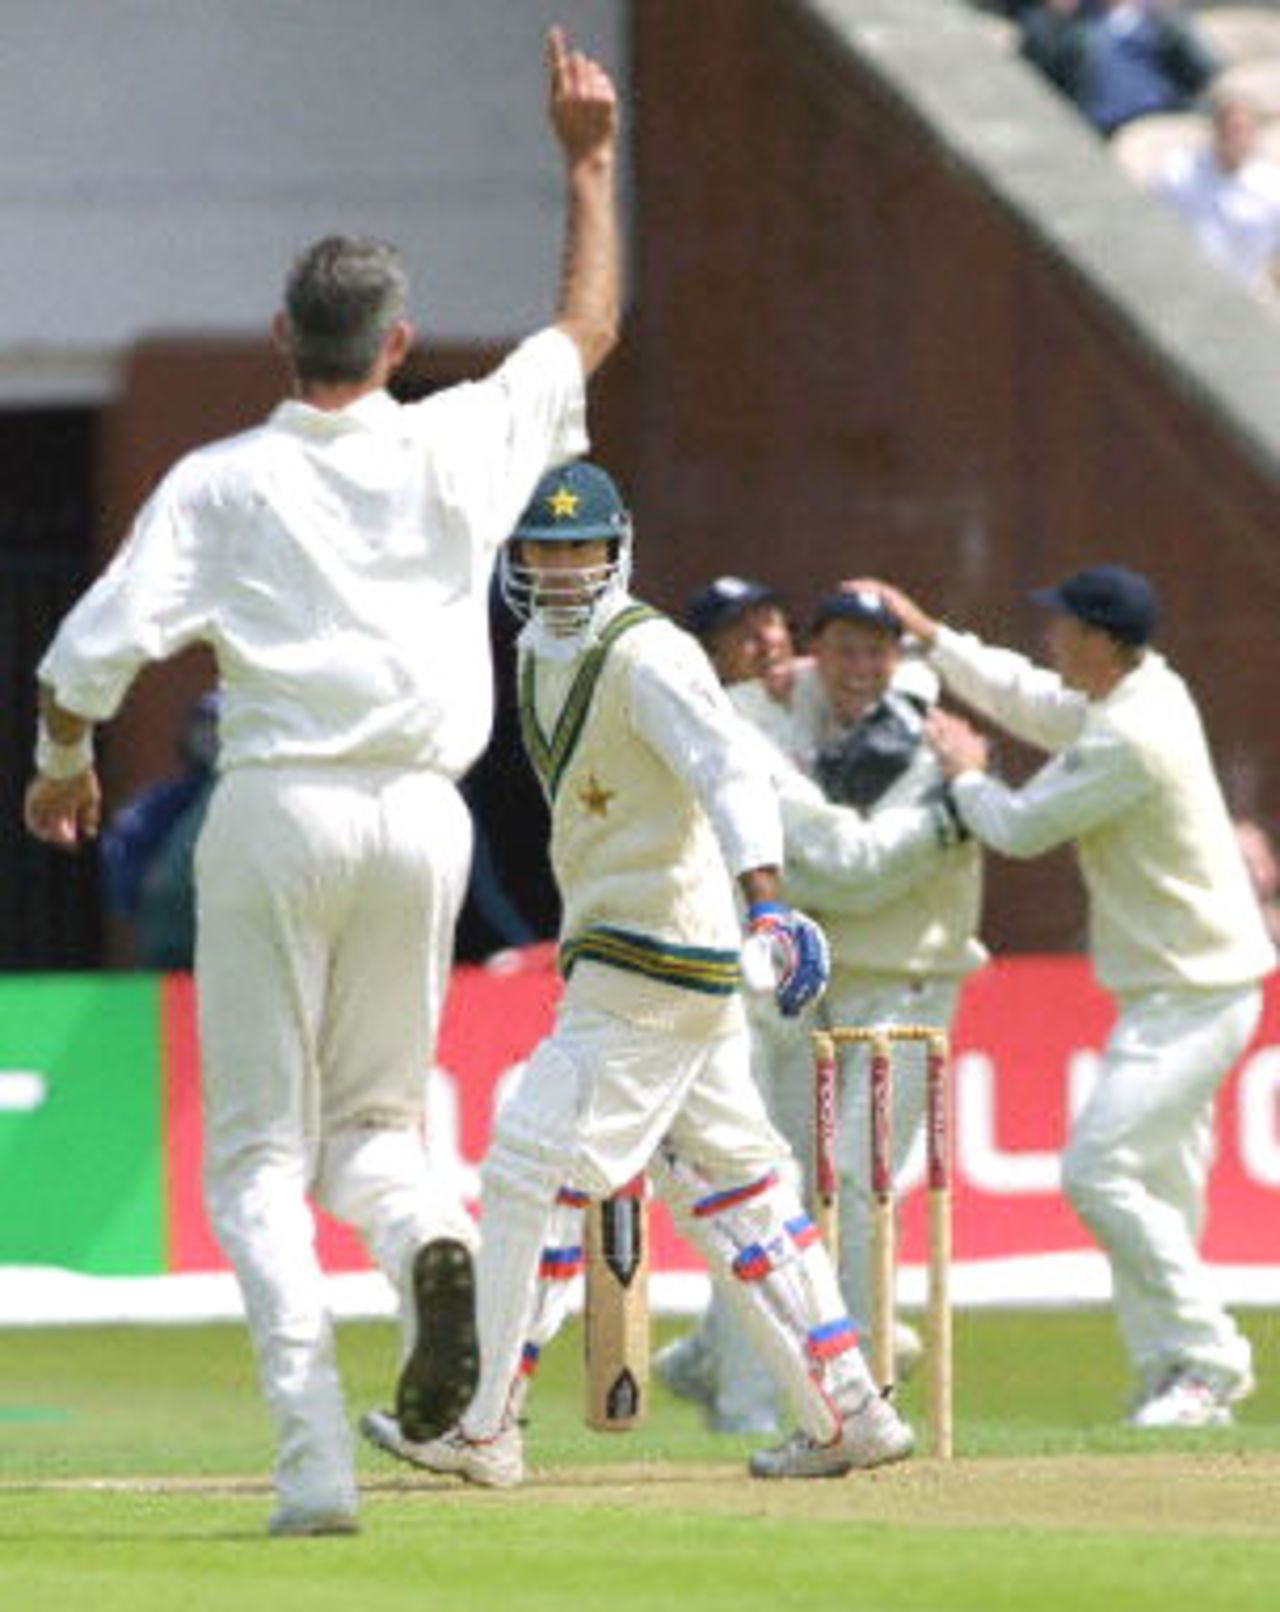 Saeed Anwar watches Andrew Caddick celebrate his dismissal after he was caught by Michael Atherton, day 1, 2nd Test at Old Trafford, 31 May - 4 June 2001.